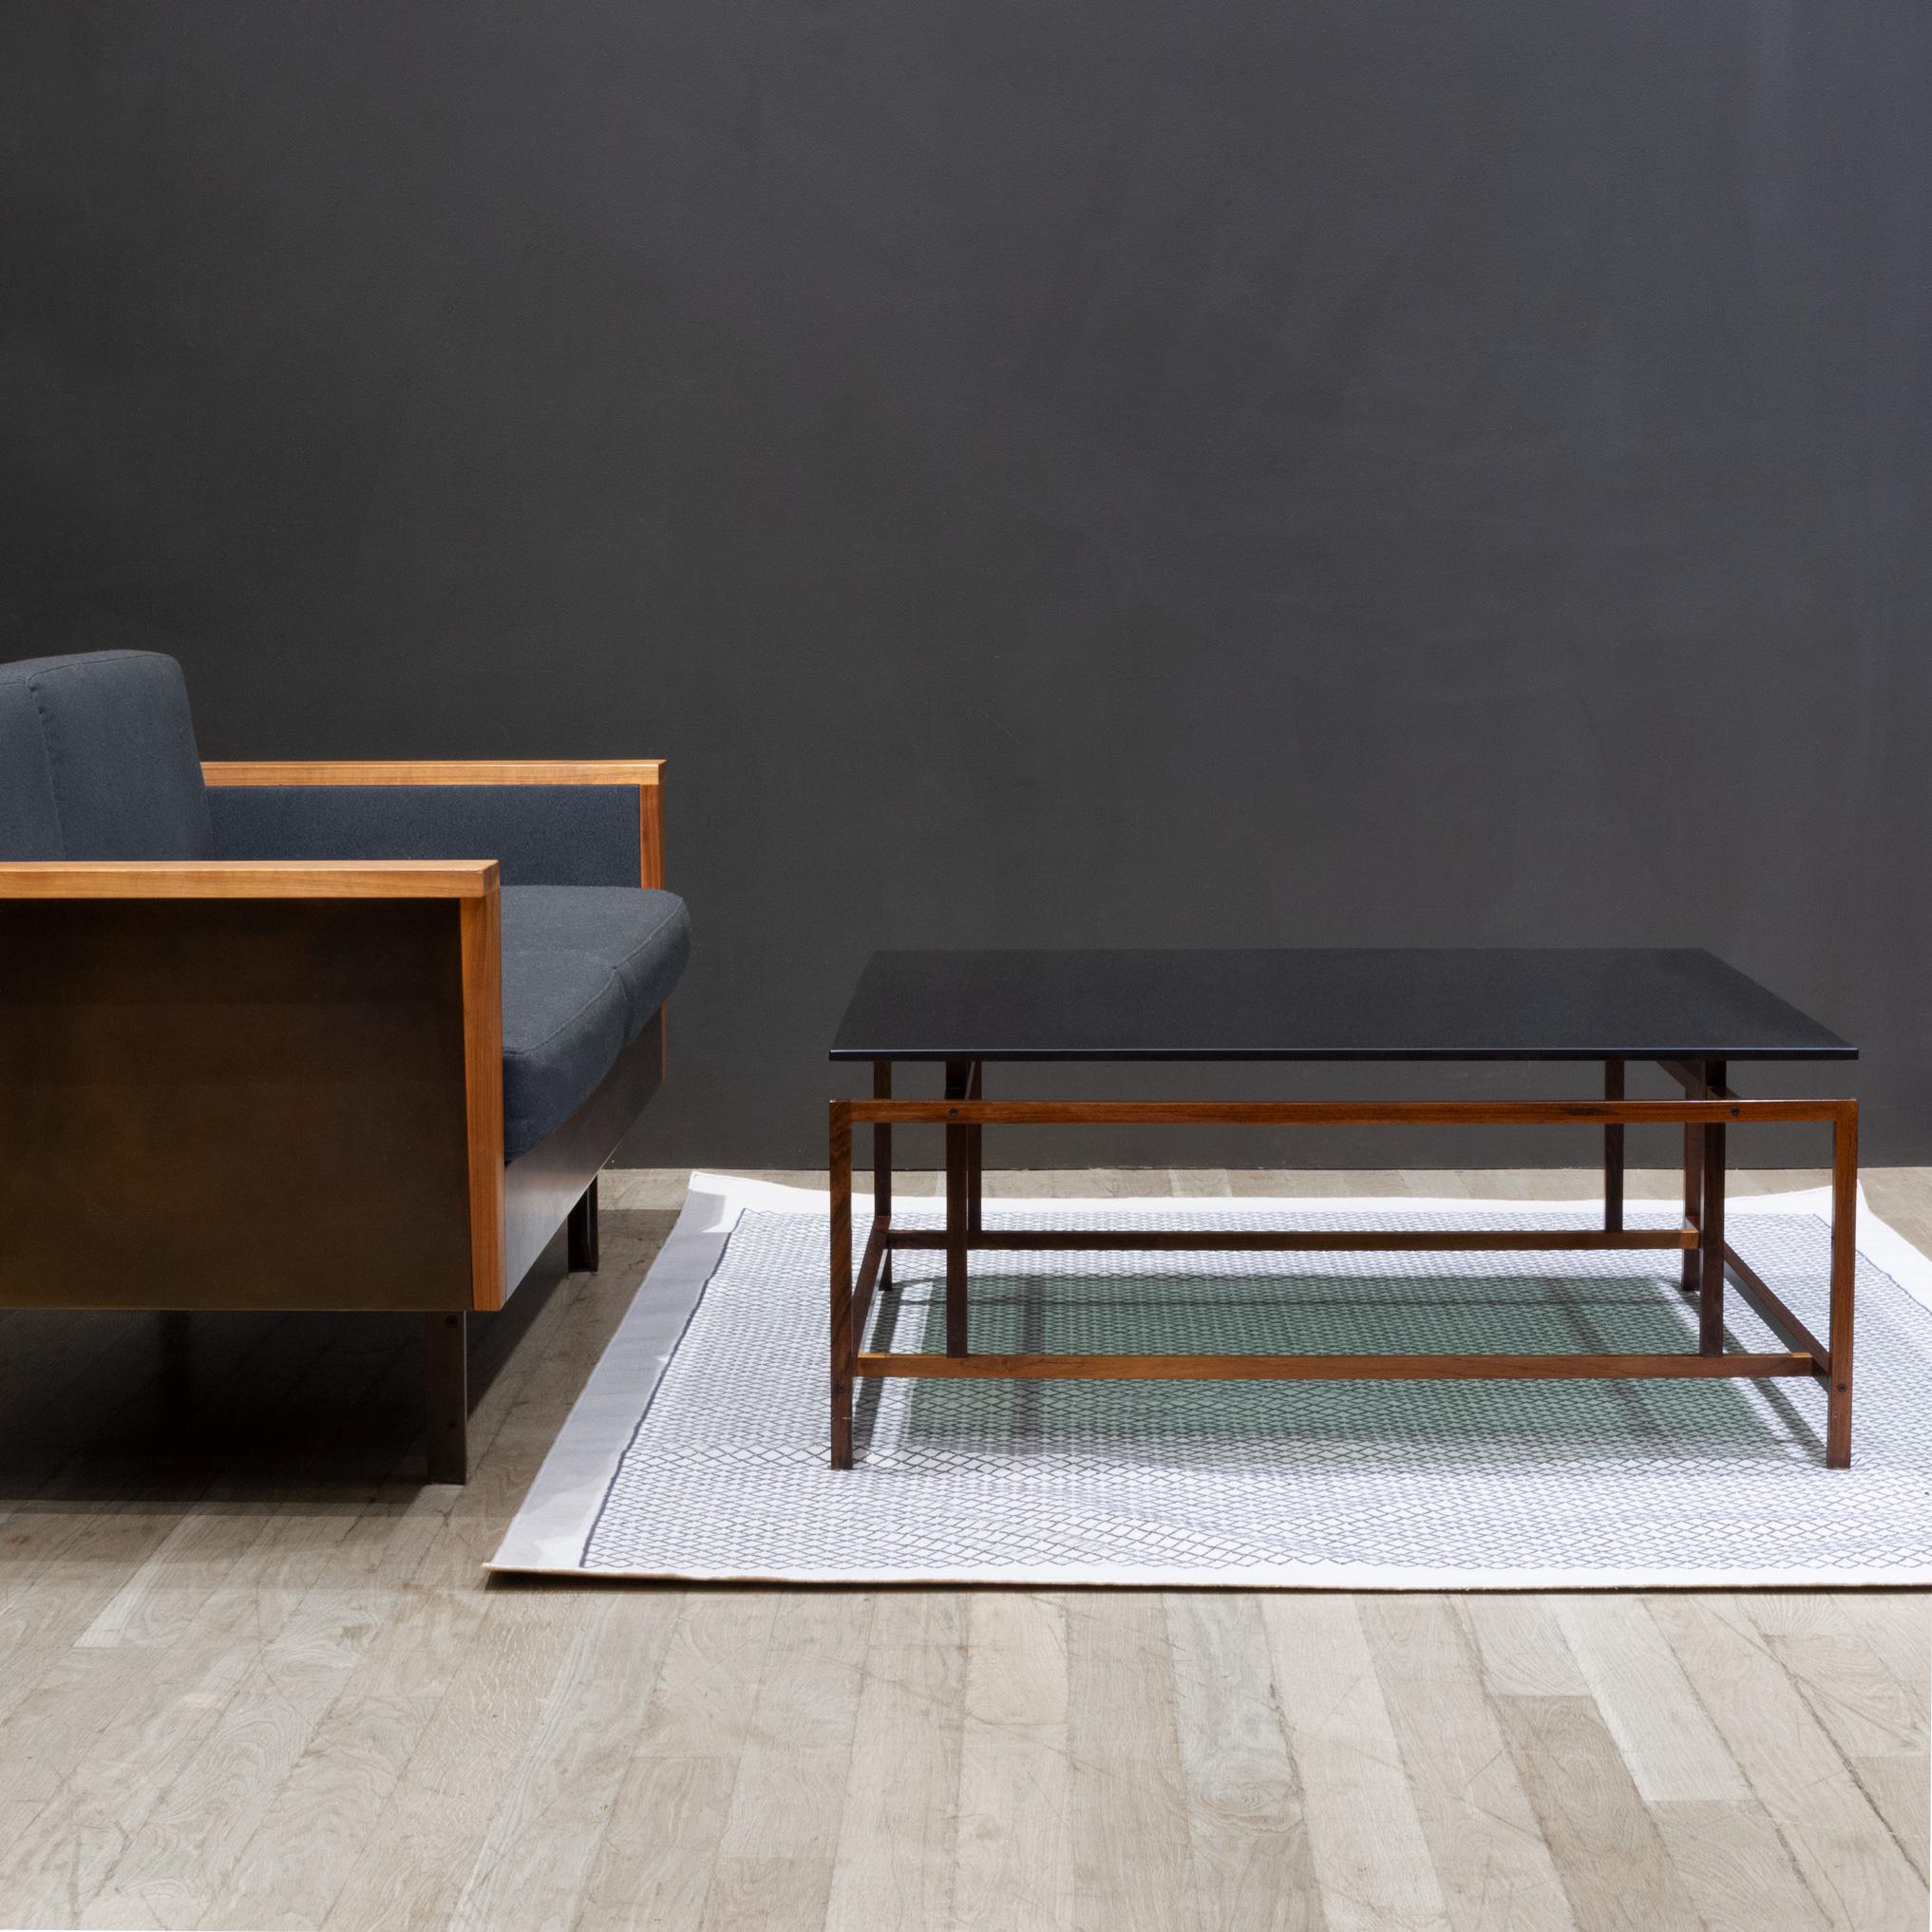 ABOUT

A Danish mid-century modern coffee table constructed from solid Brazilian Rosewood with floating smoked-glass top.
Featuring rich variegated wood grains unique to Rosewood with intricate finger joinery. The original smoked-glass top sits on